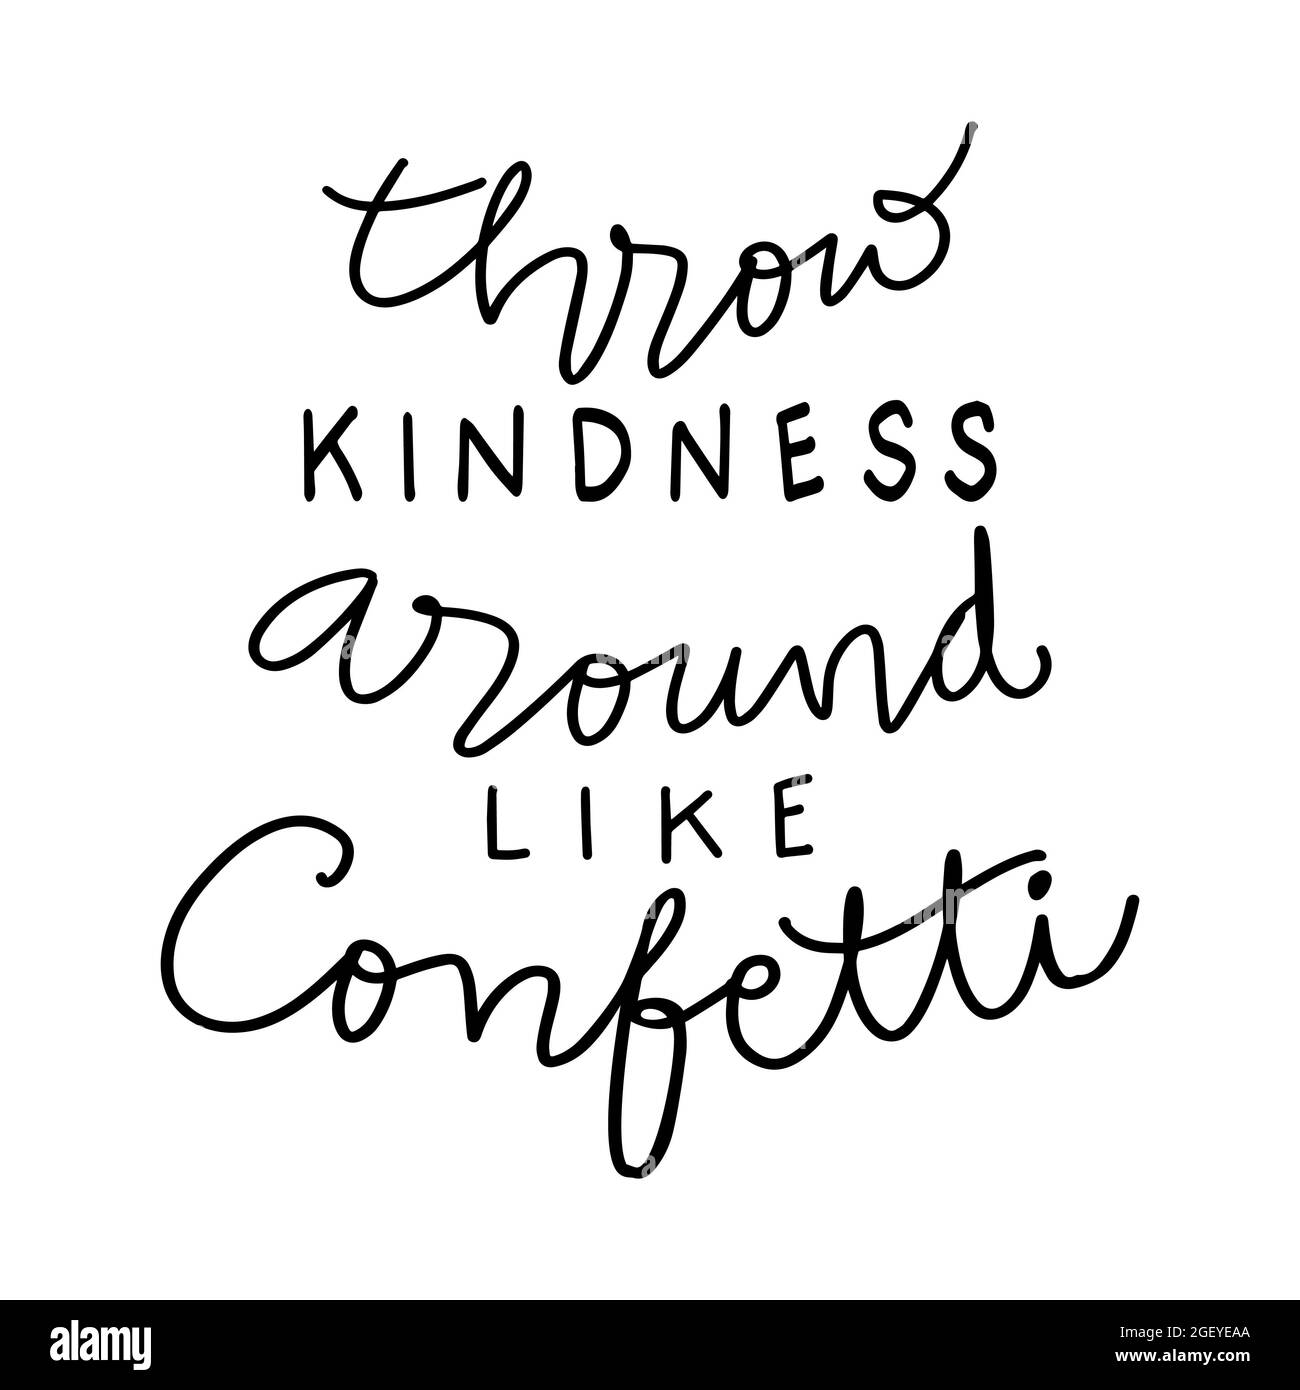 Throw kindness around like confetti hand lettering. Motivational quote. Stock Photo